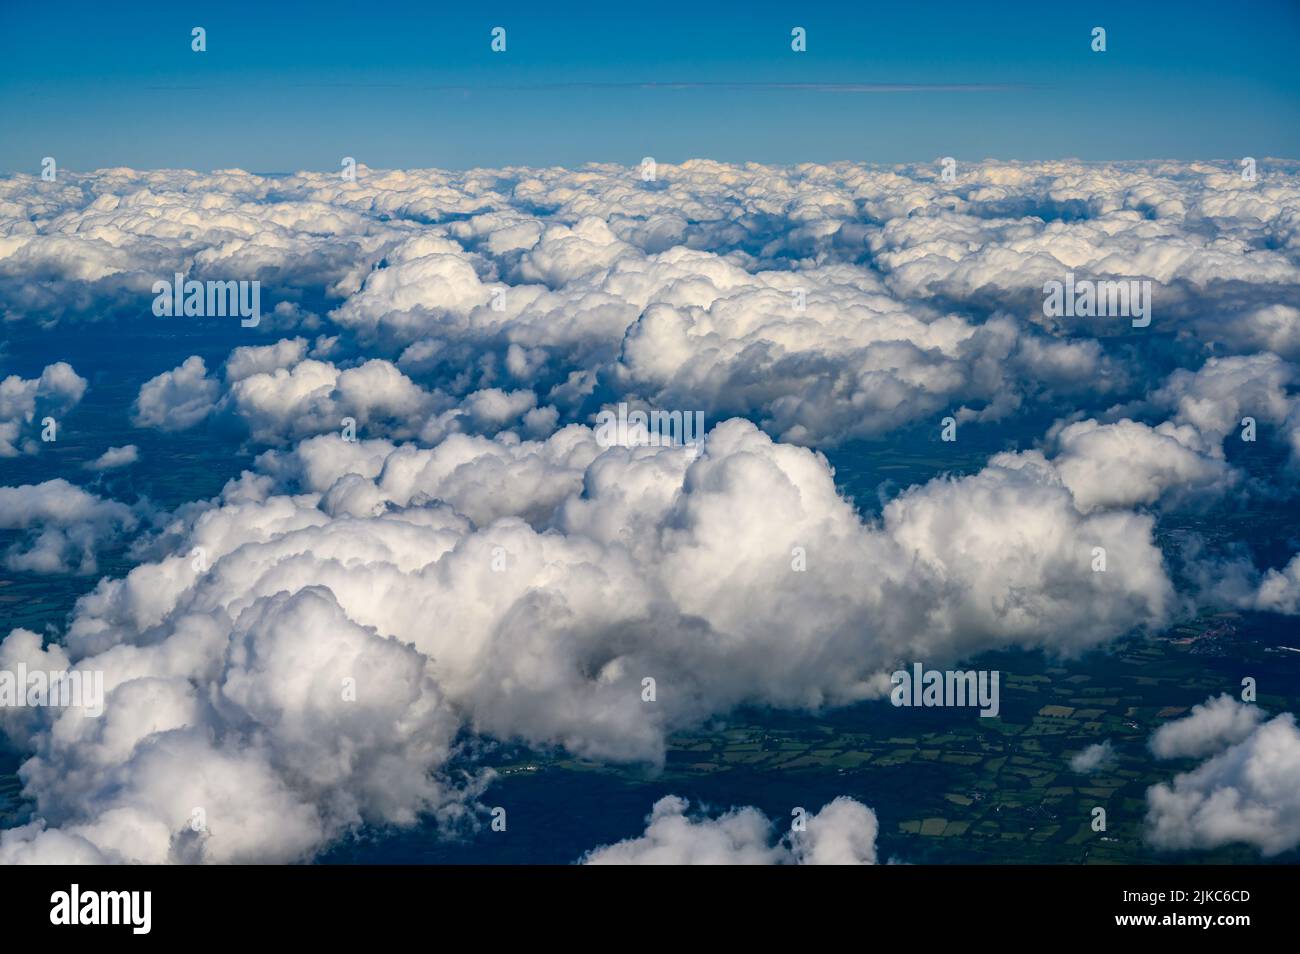 Aerial view over south coast of England from above white cumulus clouds photographed from a passenger jet. Stock Photo